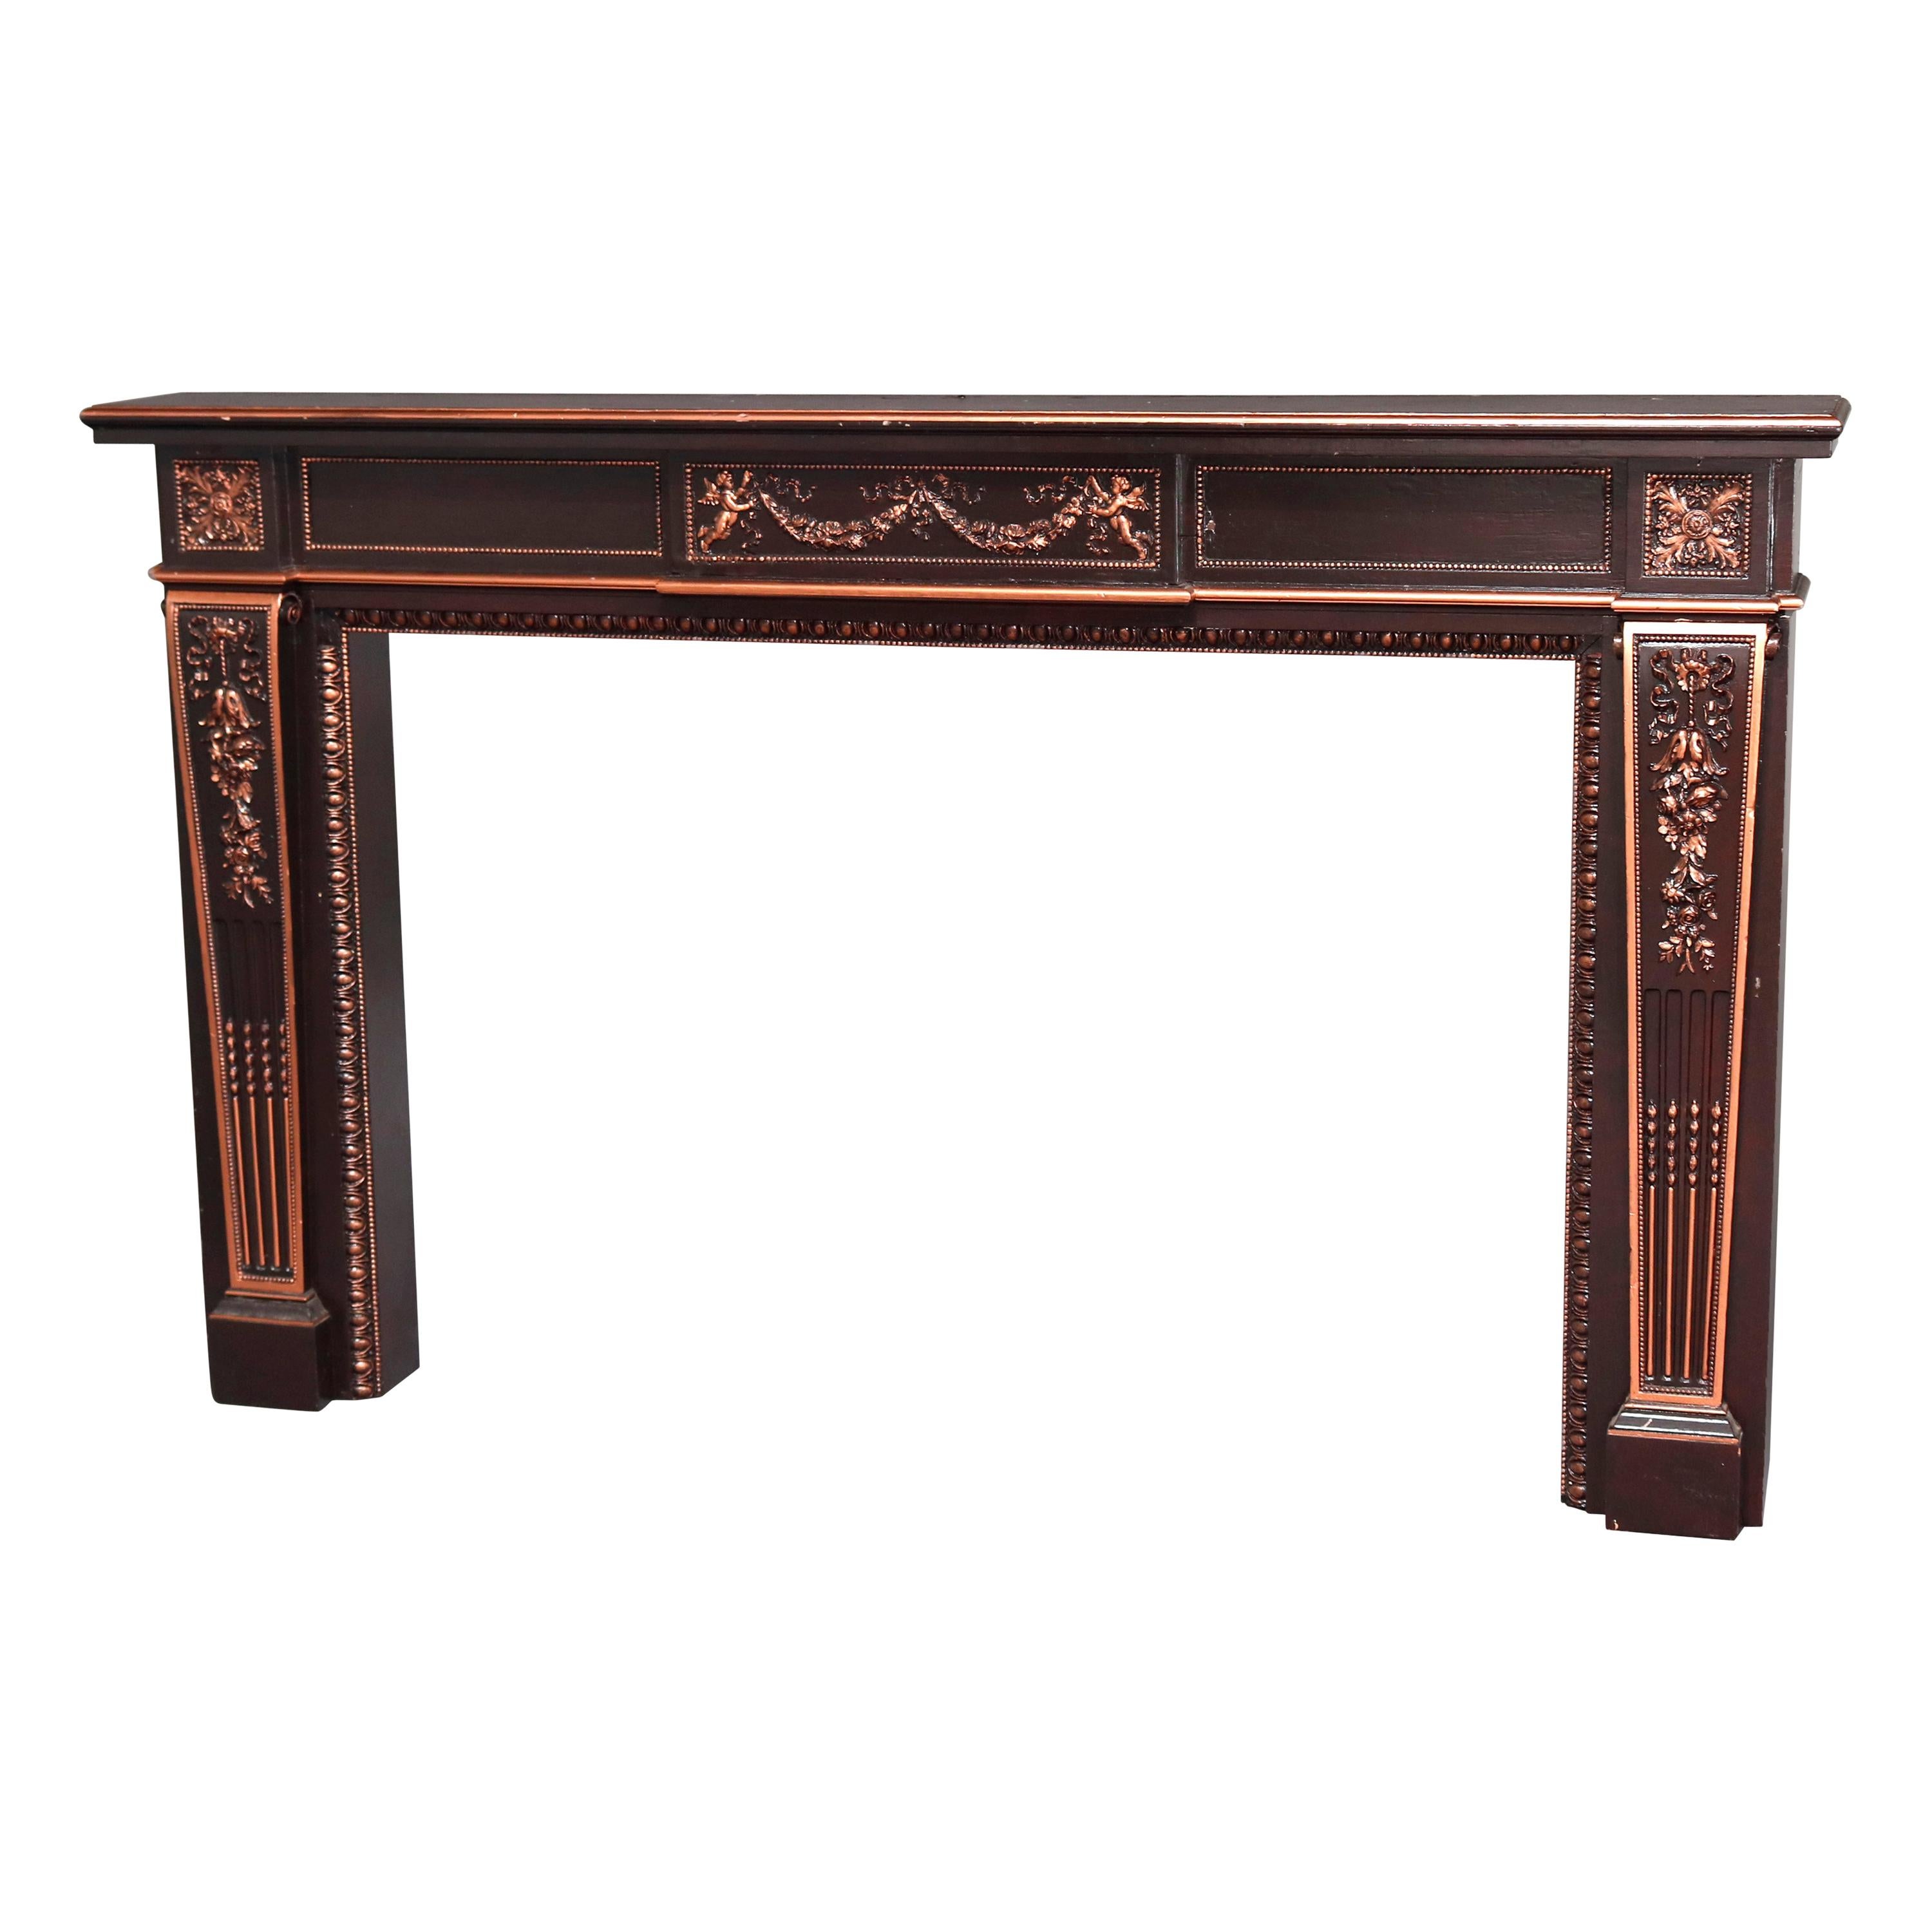 French Neoclassical Parcel-Gilt Mahogany Fireplace Mantel, 20th Century